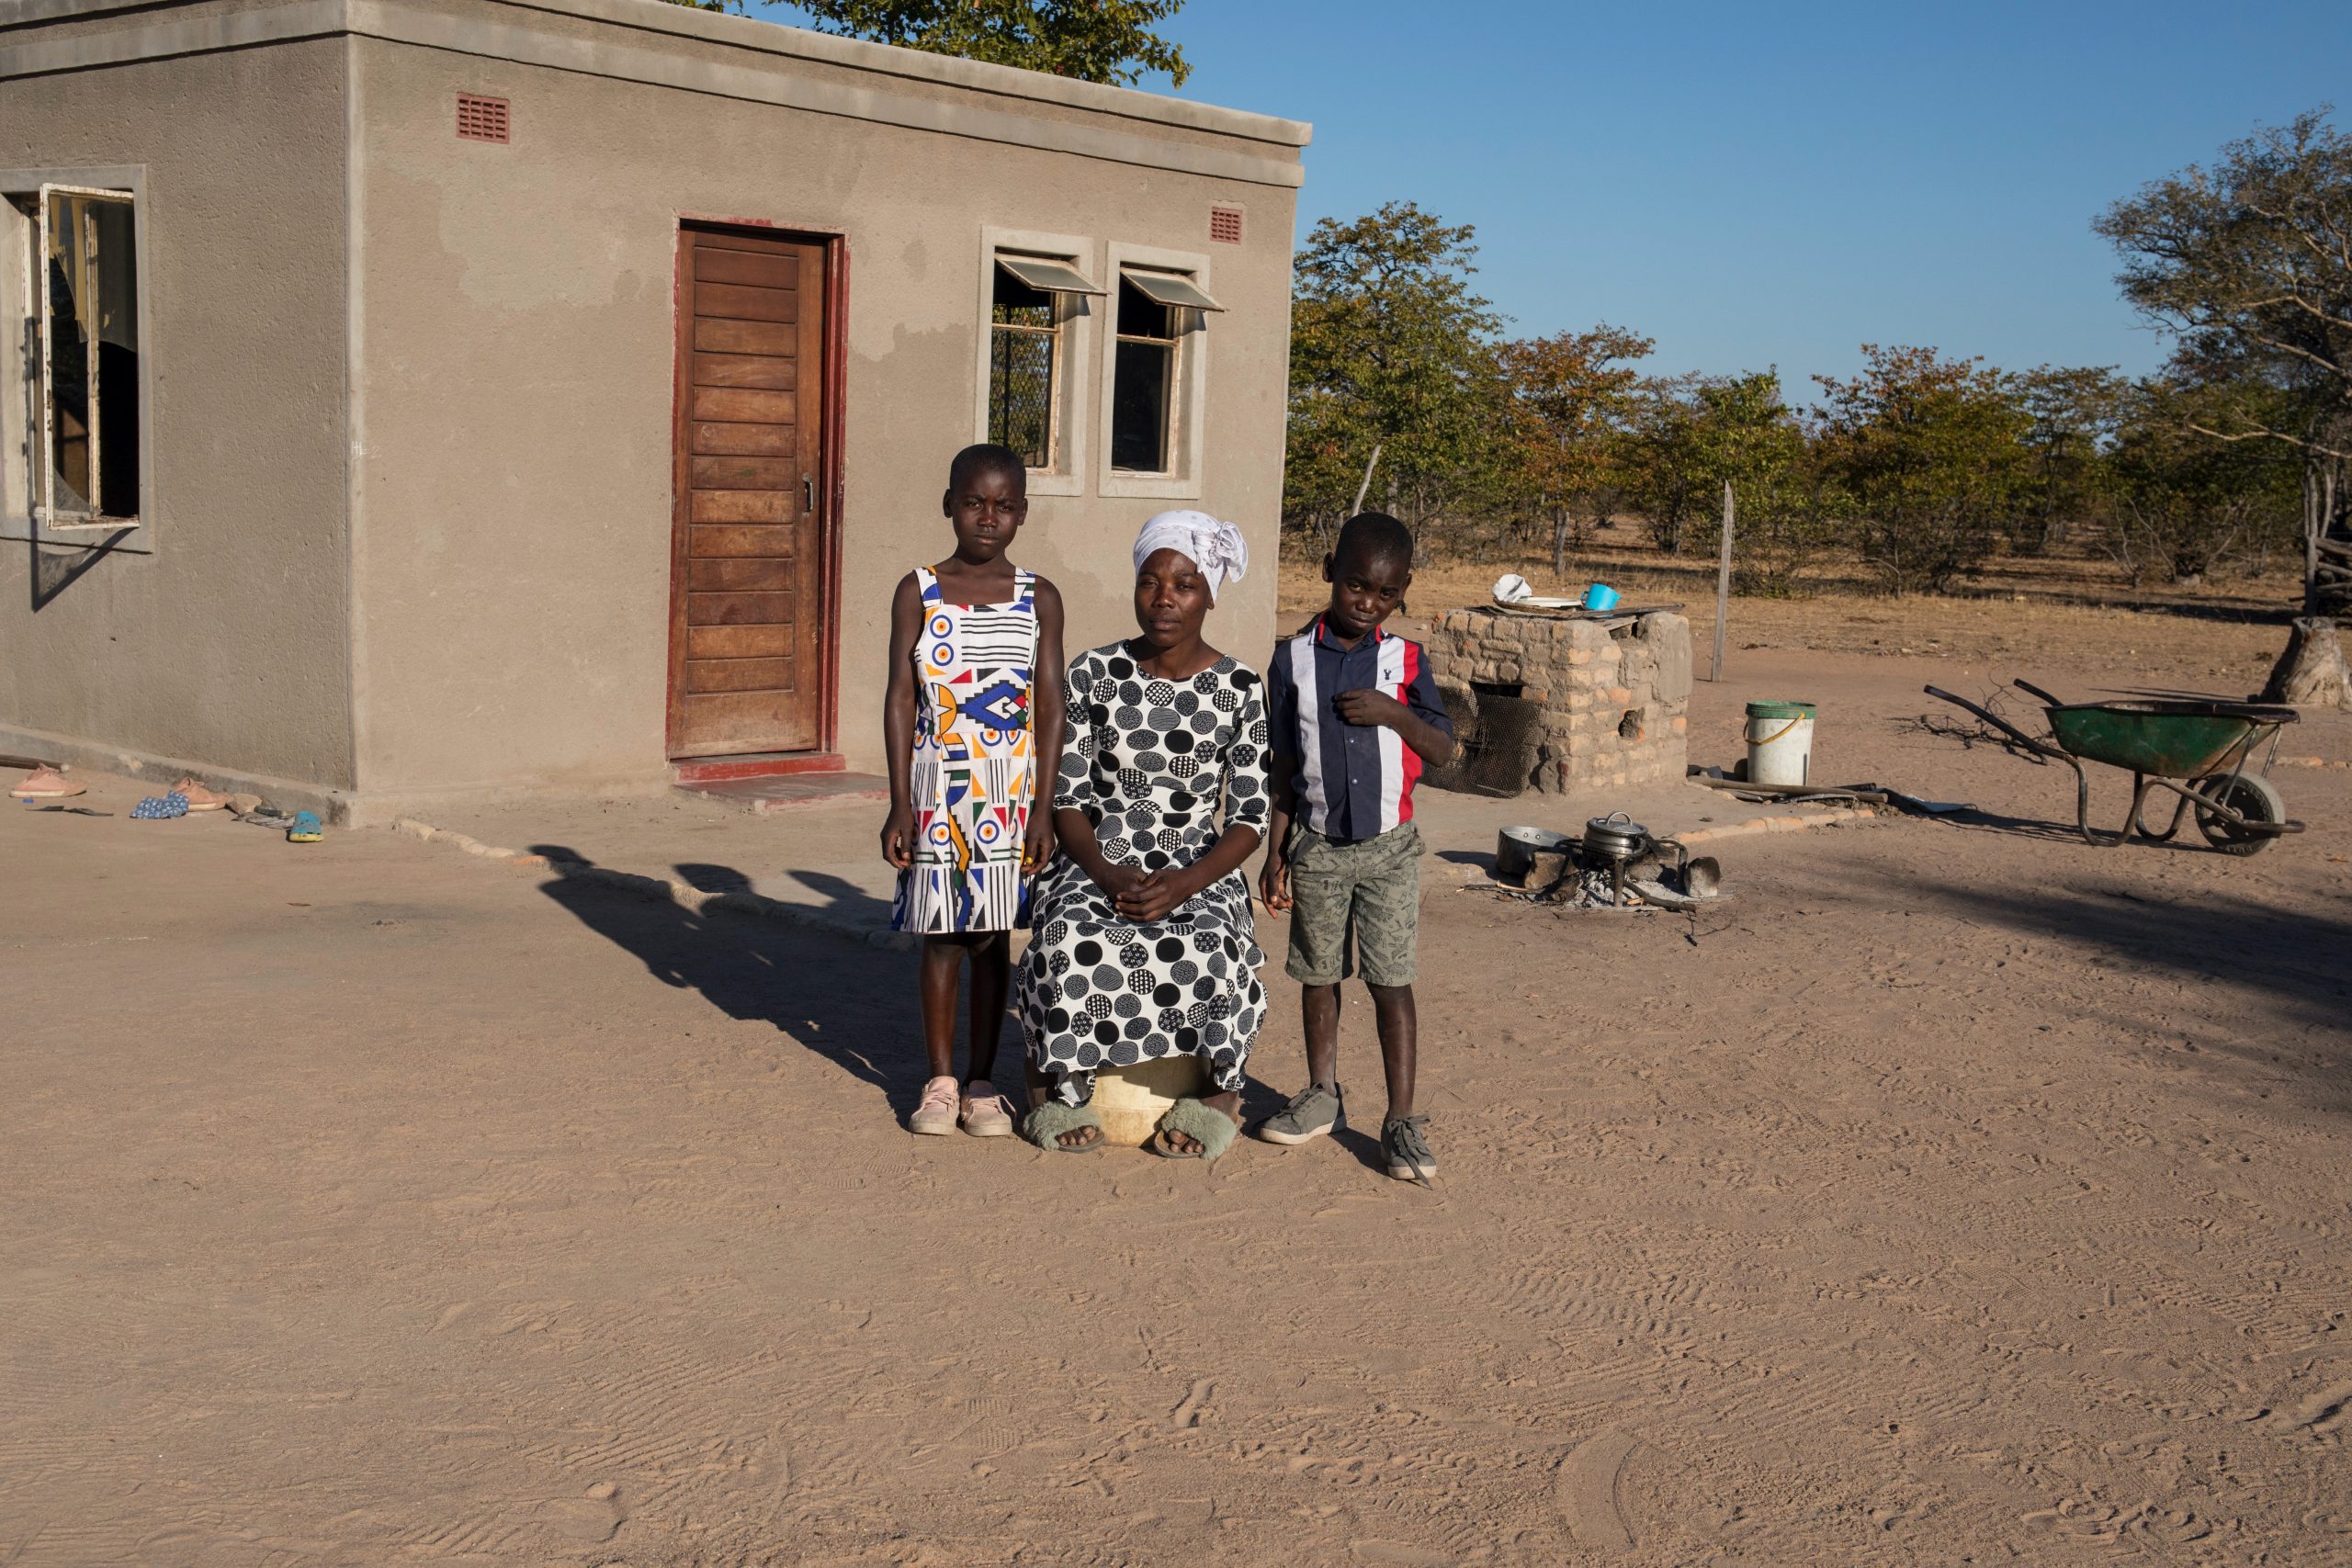 Thandekile, 31, with daughter Nomatter, 11 and son, Forward, 8, at their home in Matabeleland, Zimbabwe. The children lost their father to COVID-19 in 2020 while he was working in South Africa to provide for the family Photo Credit: Cynthia R Matonhodze